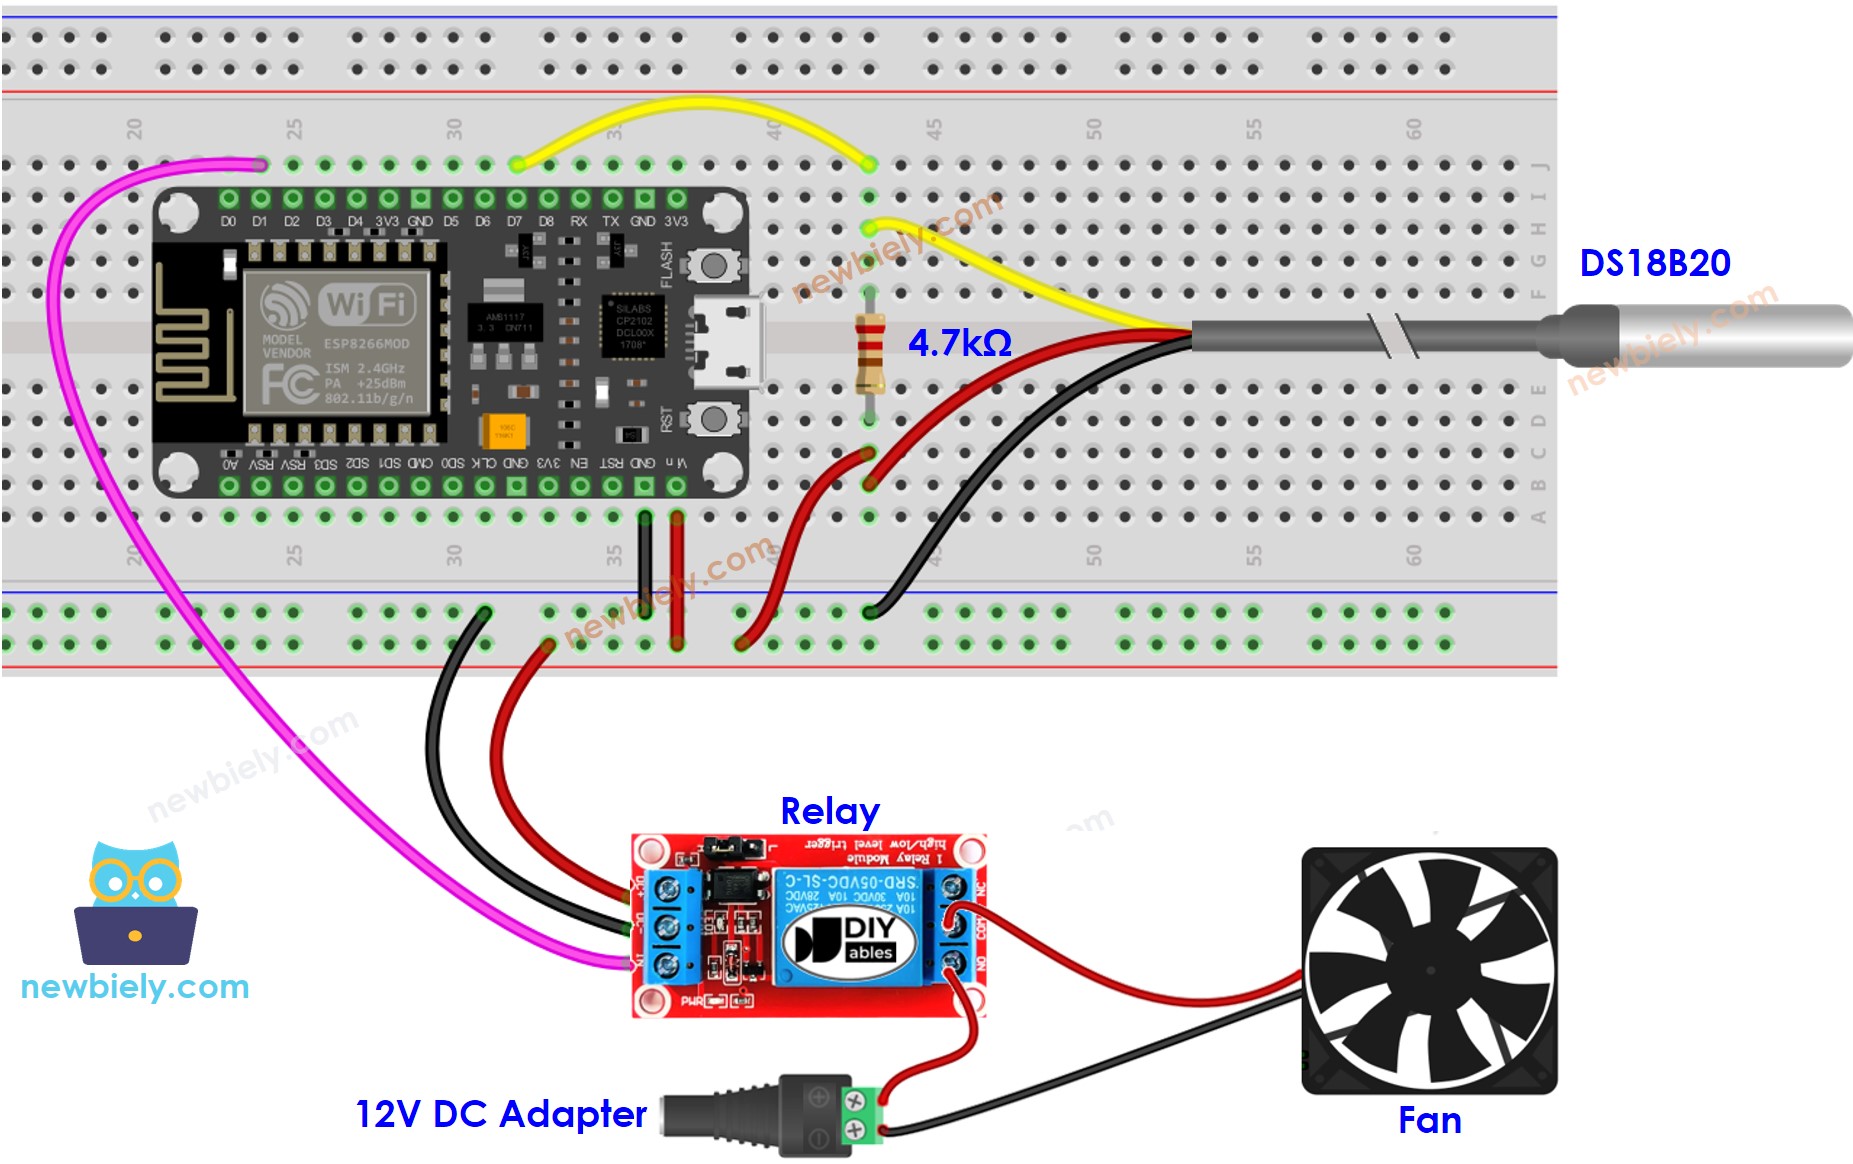 The wiring diagram between ESP8266 NodeMCU and cooling fan system